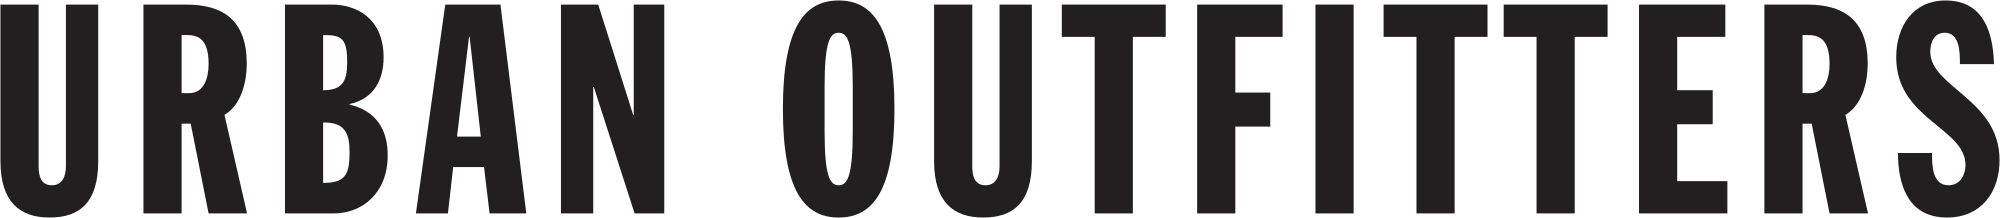 Urban Outfitters Logo - File:Urban Outfitters logo.svg - Wikimedia Commons